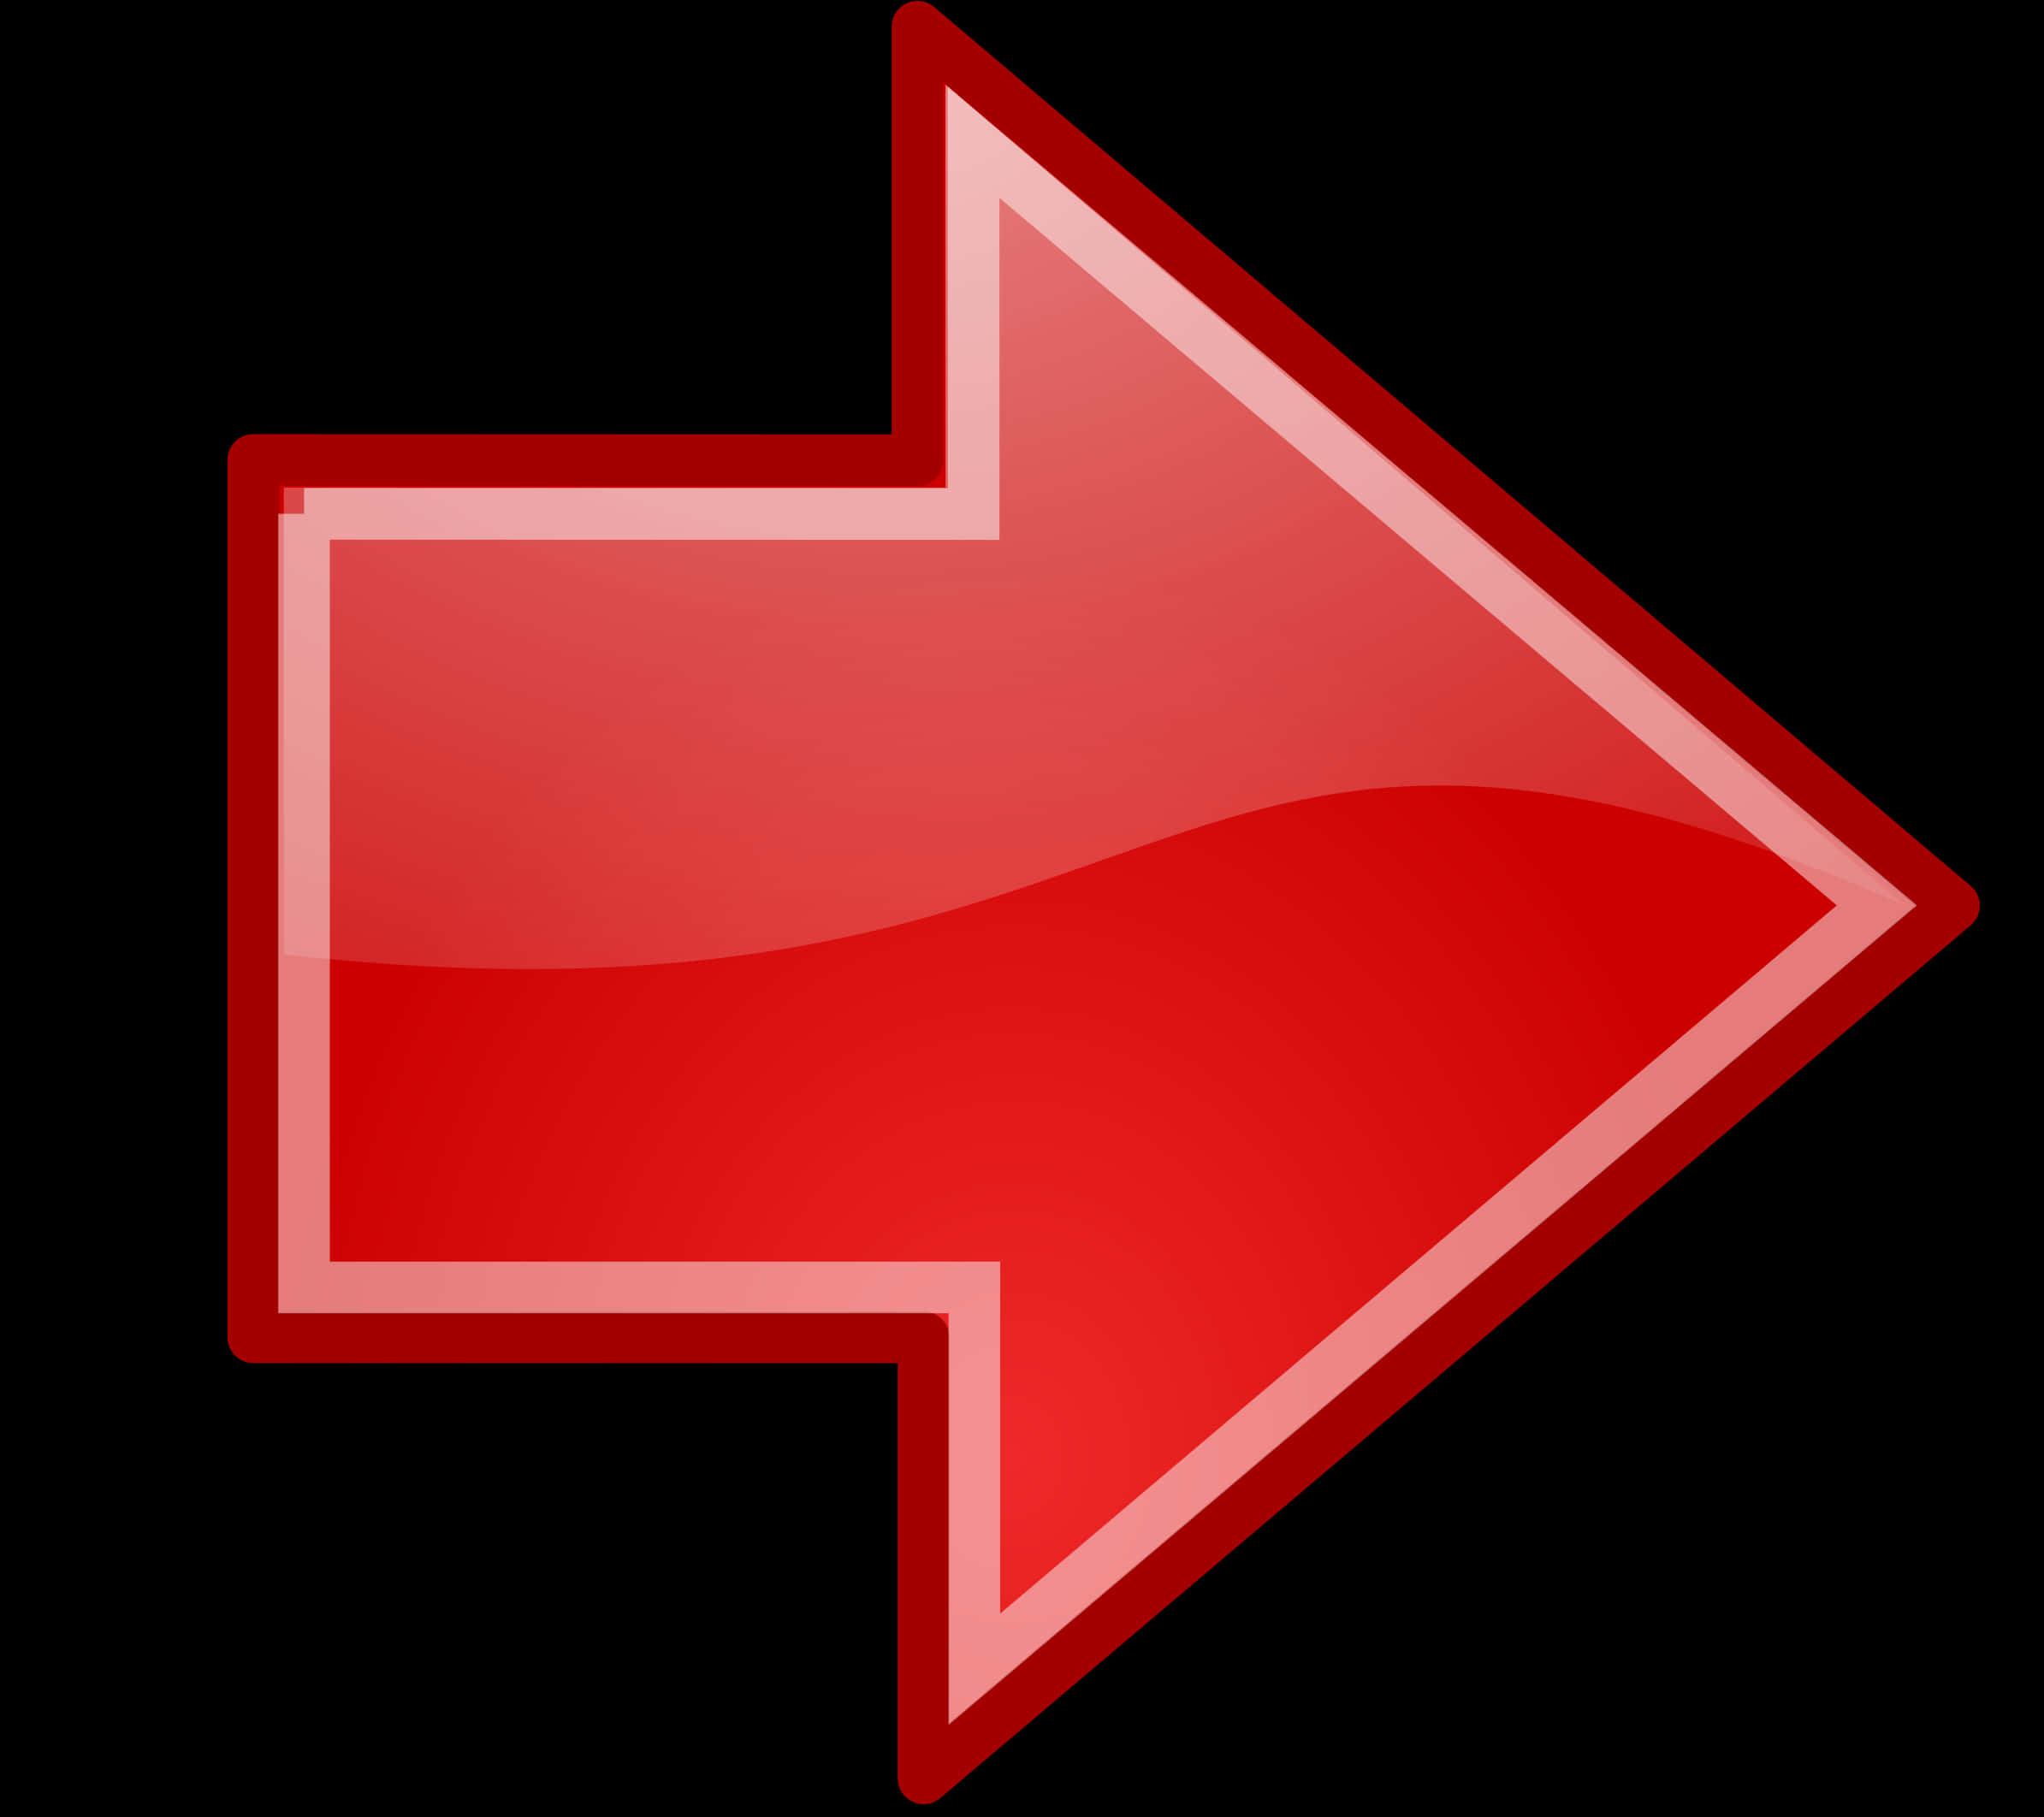 Glossy Red Arrow Graphic